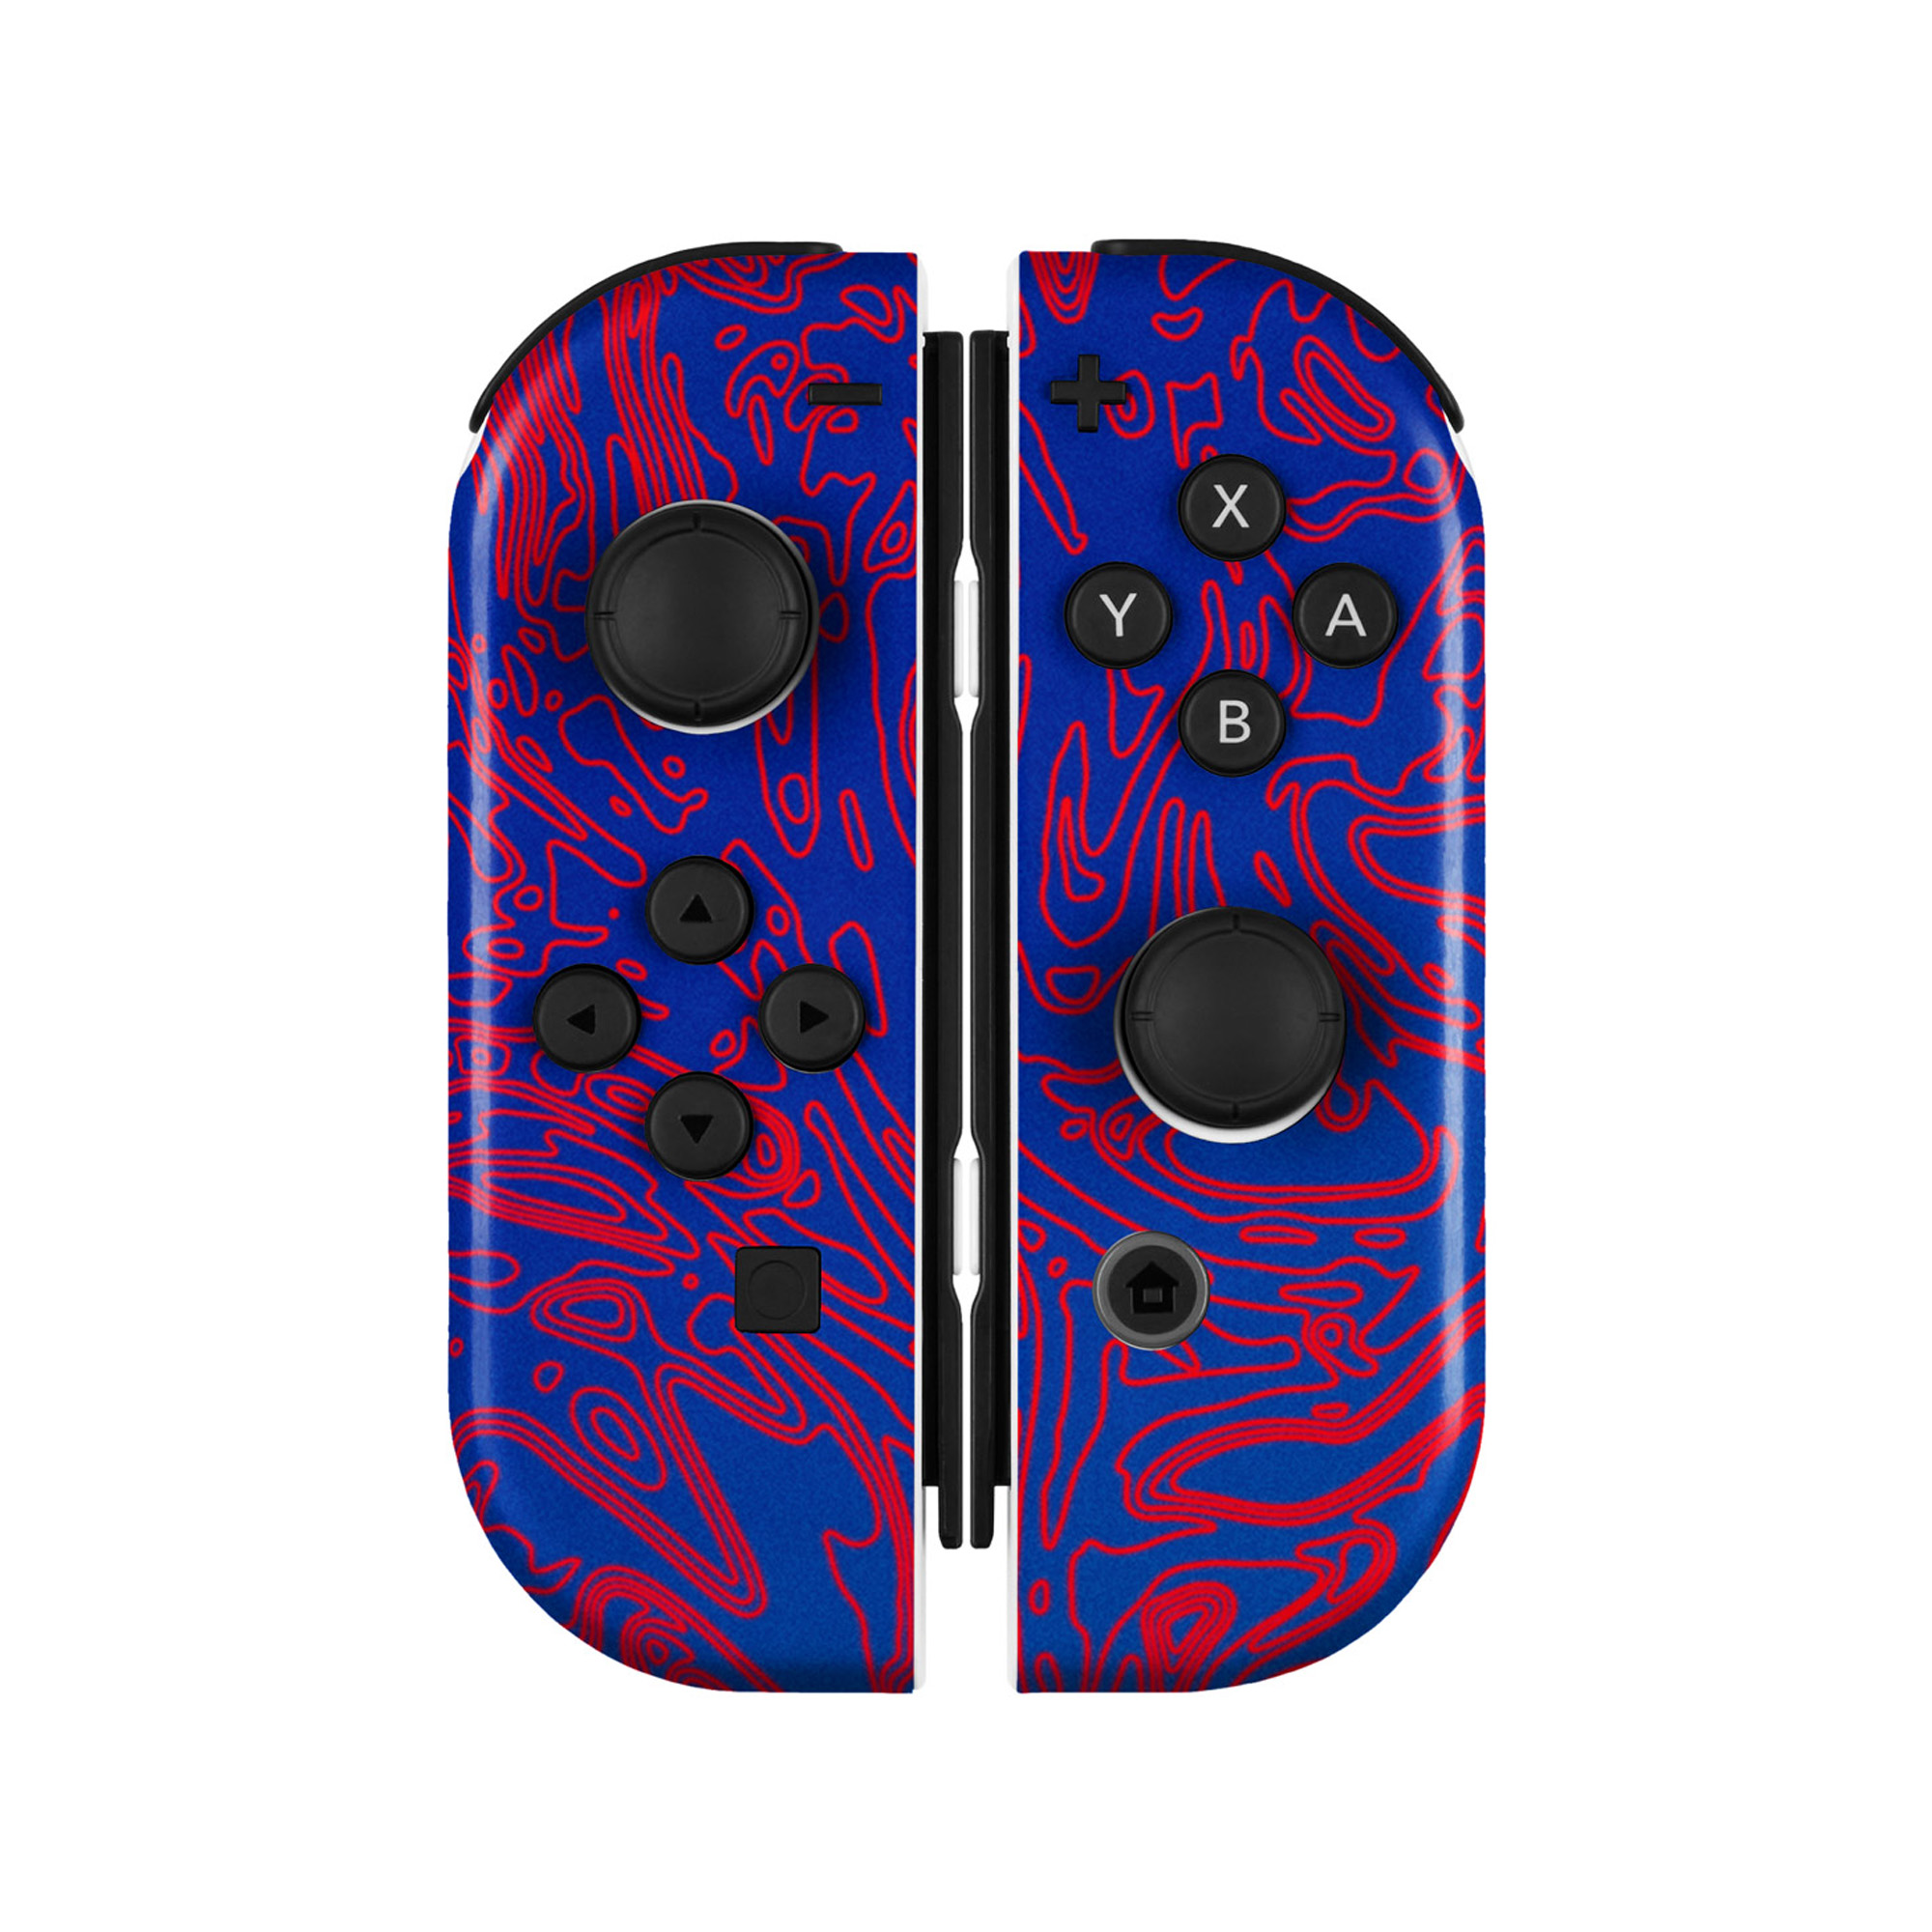 Nintendo Switch Joy-Cons with the Damascus skin from dbrand.